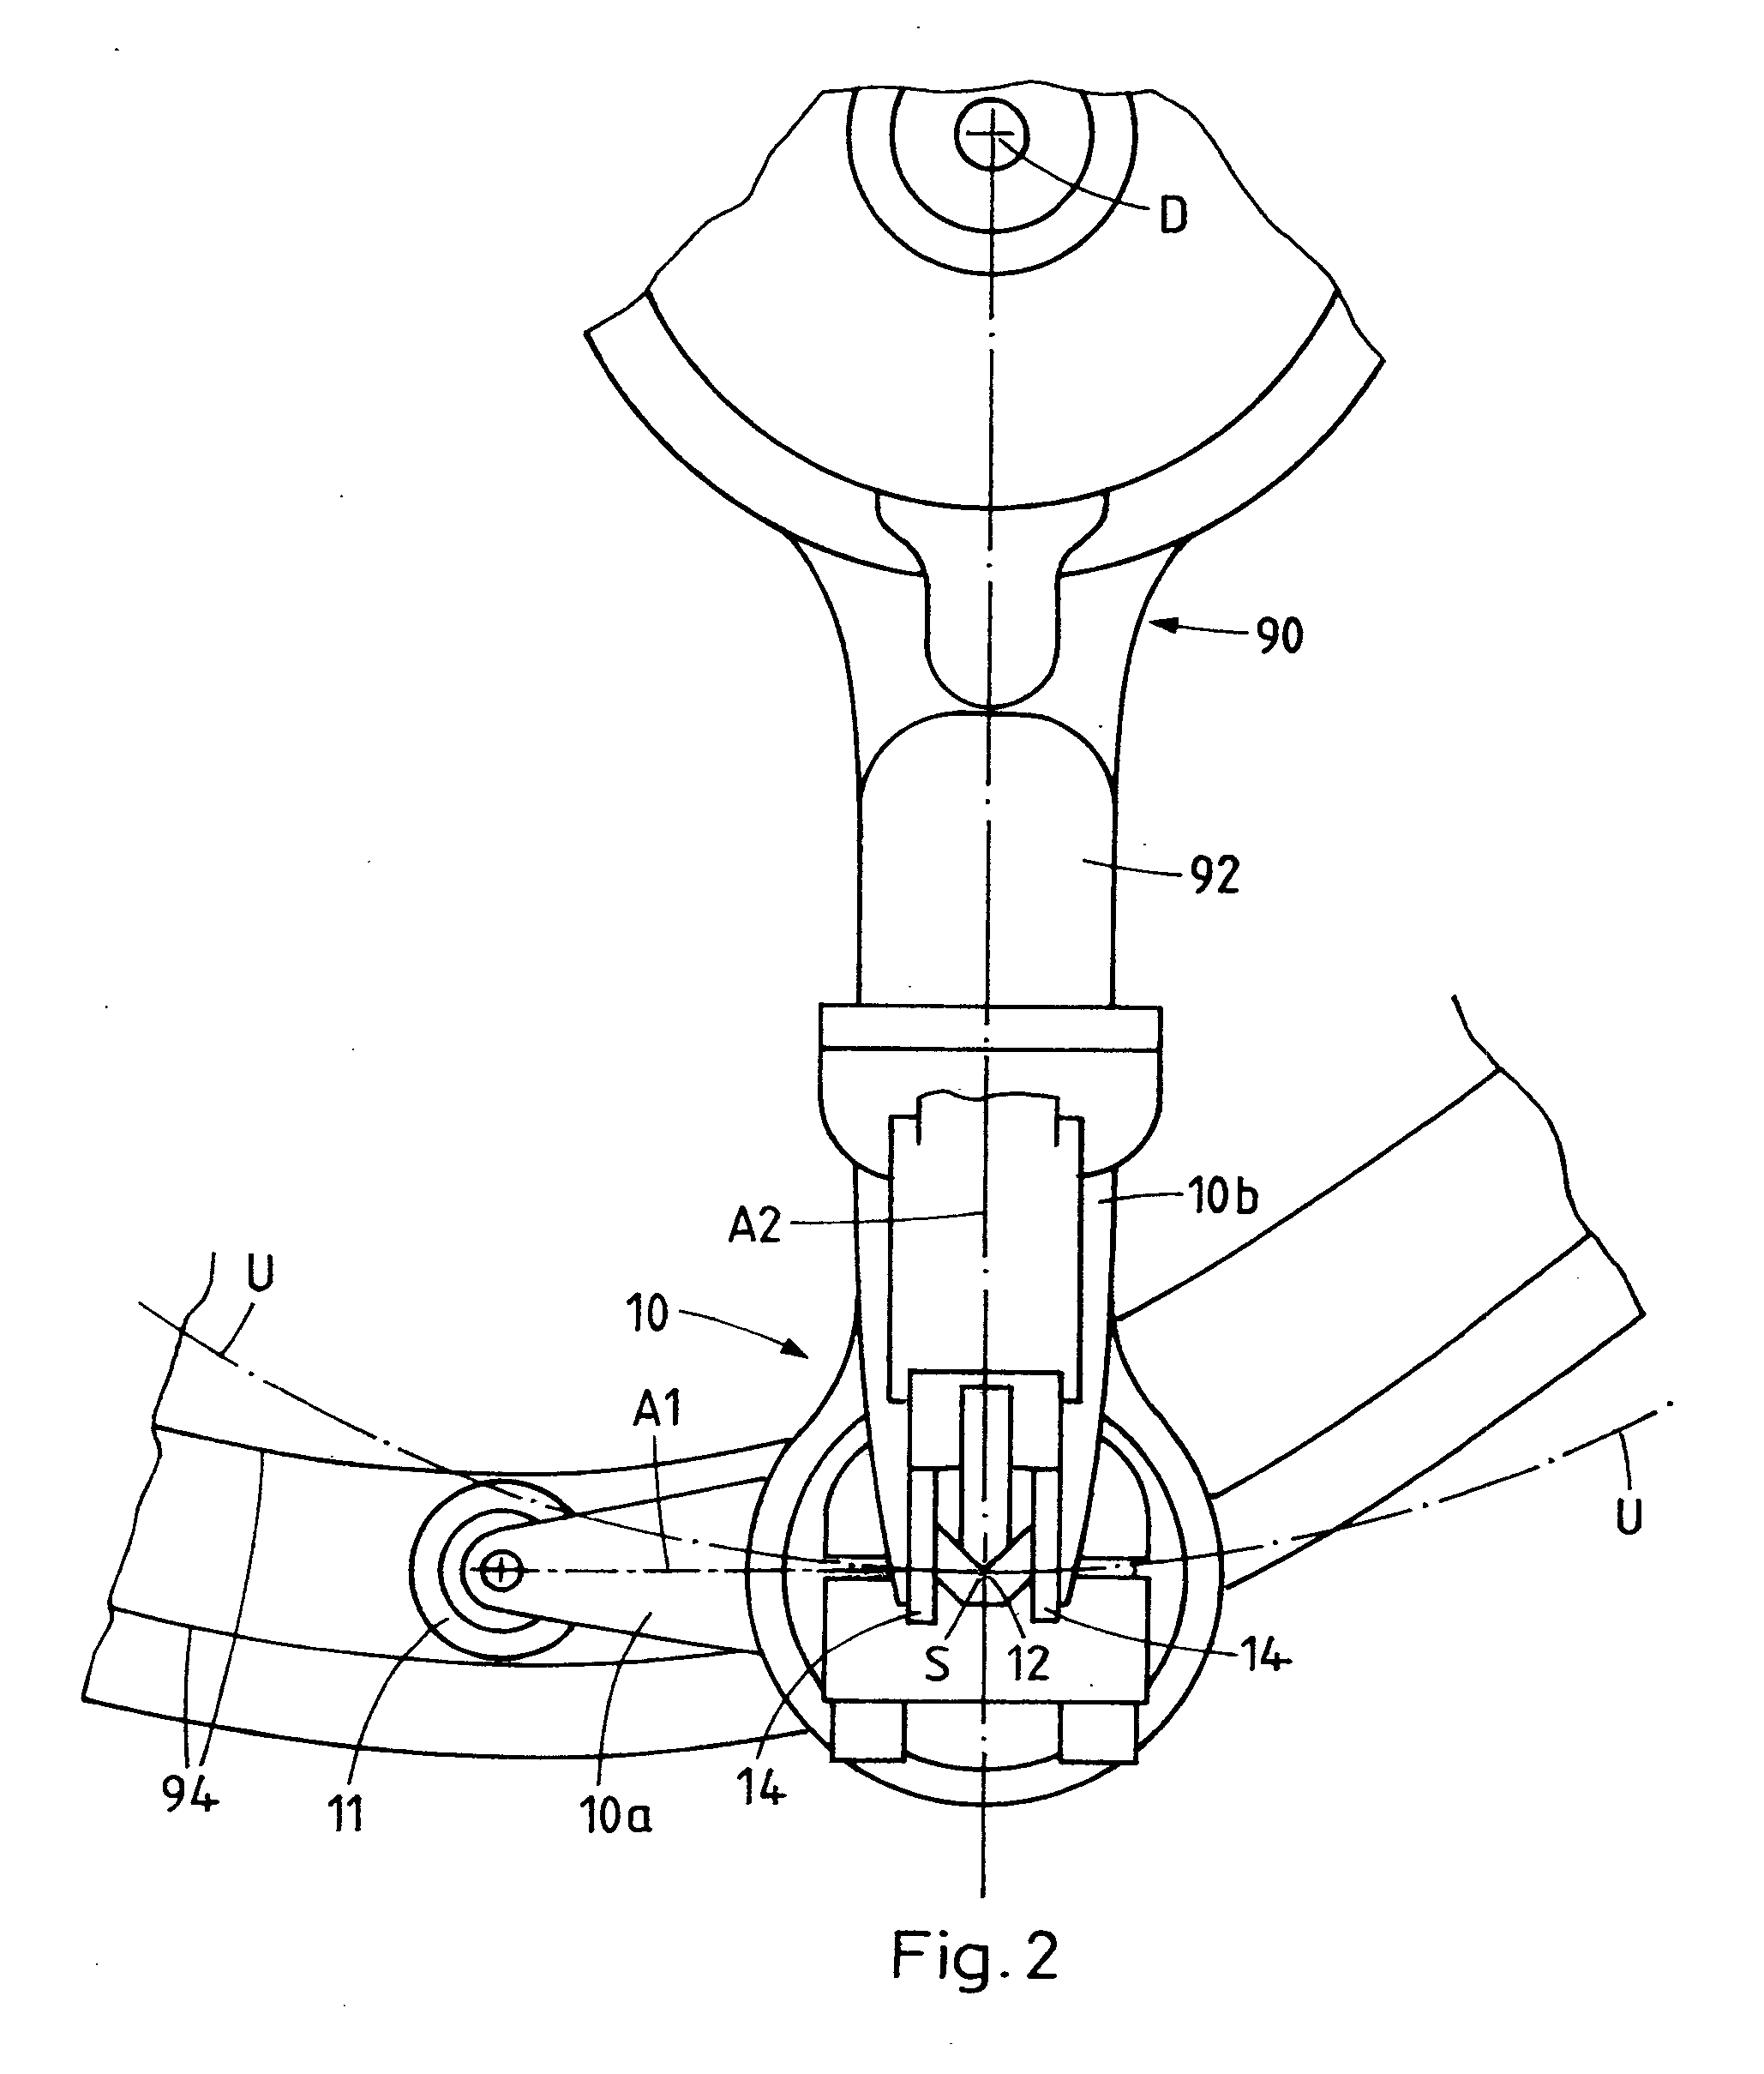 Apparatus for processing flat articles, in particular printed products